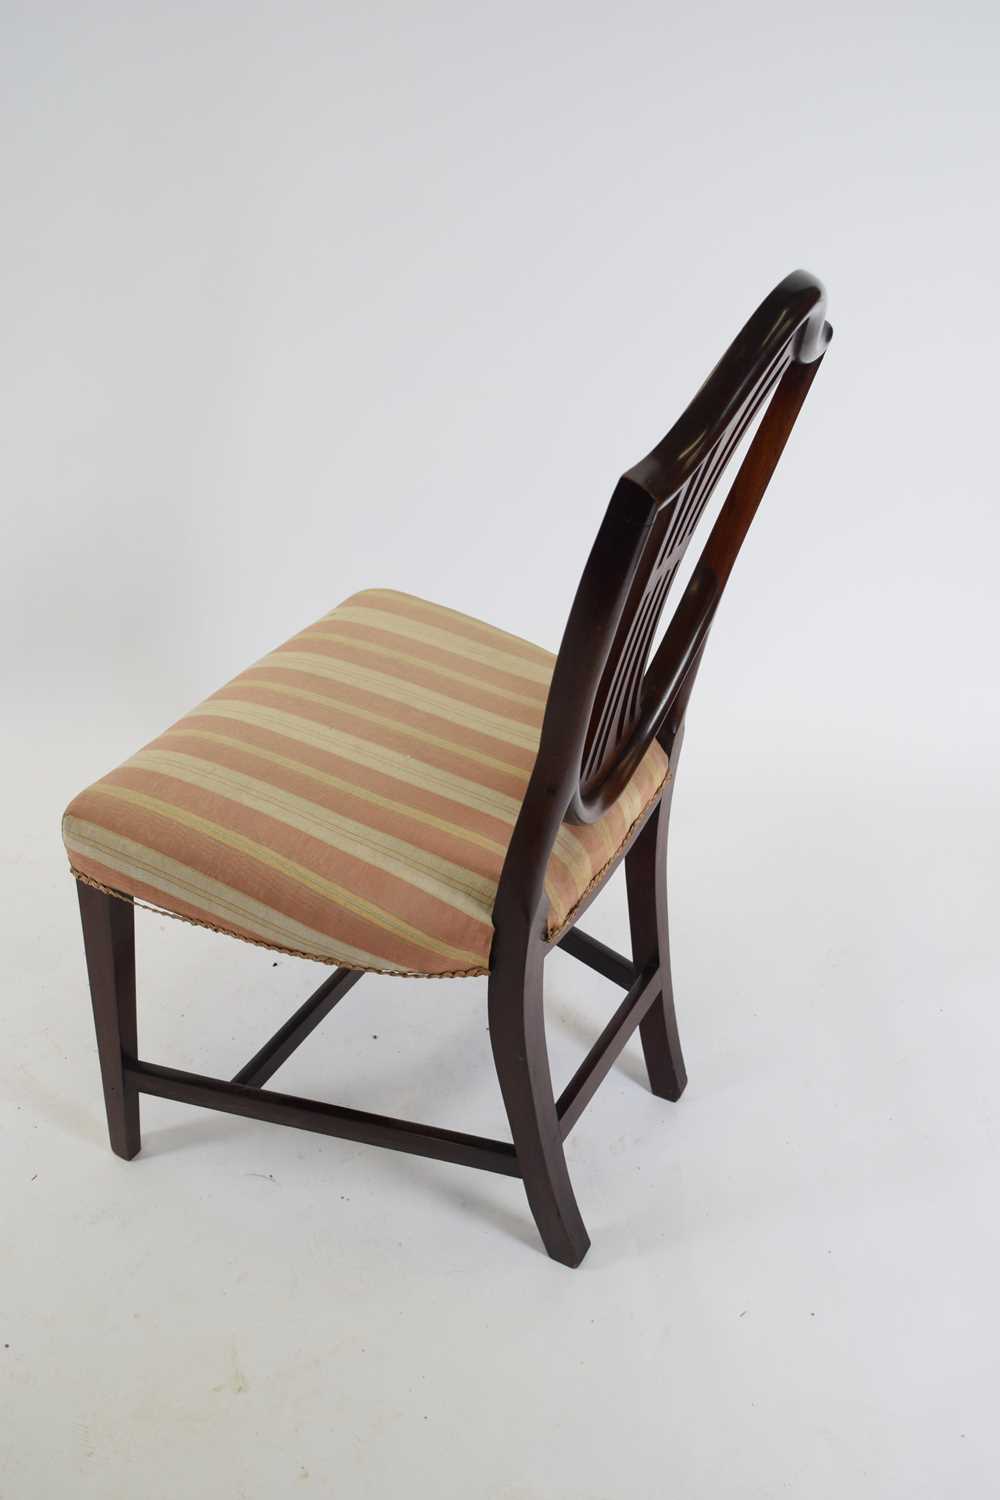 Mahogany framed shield back dining chair decorated with wheatsheaf detail and upholstered in striped - Image 4 of 4